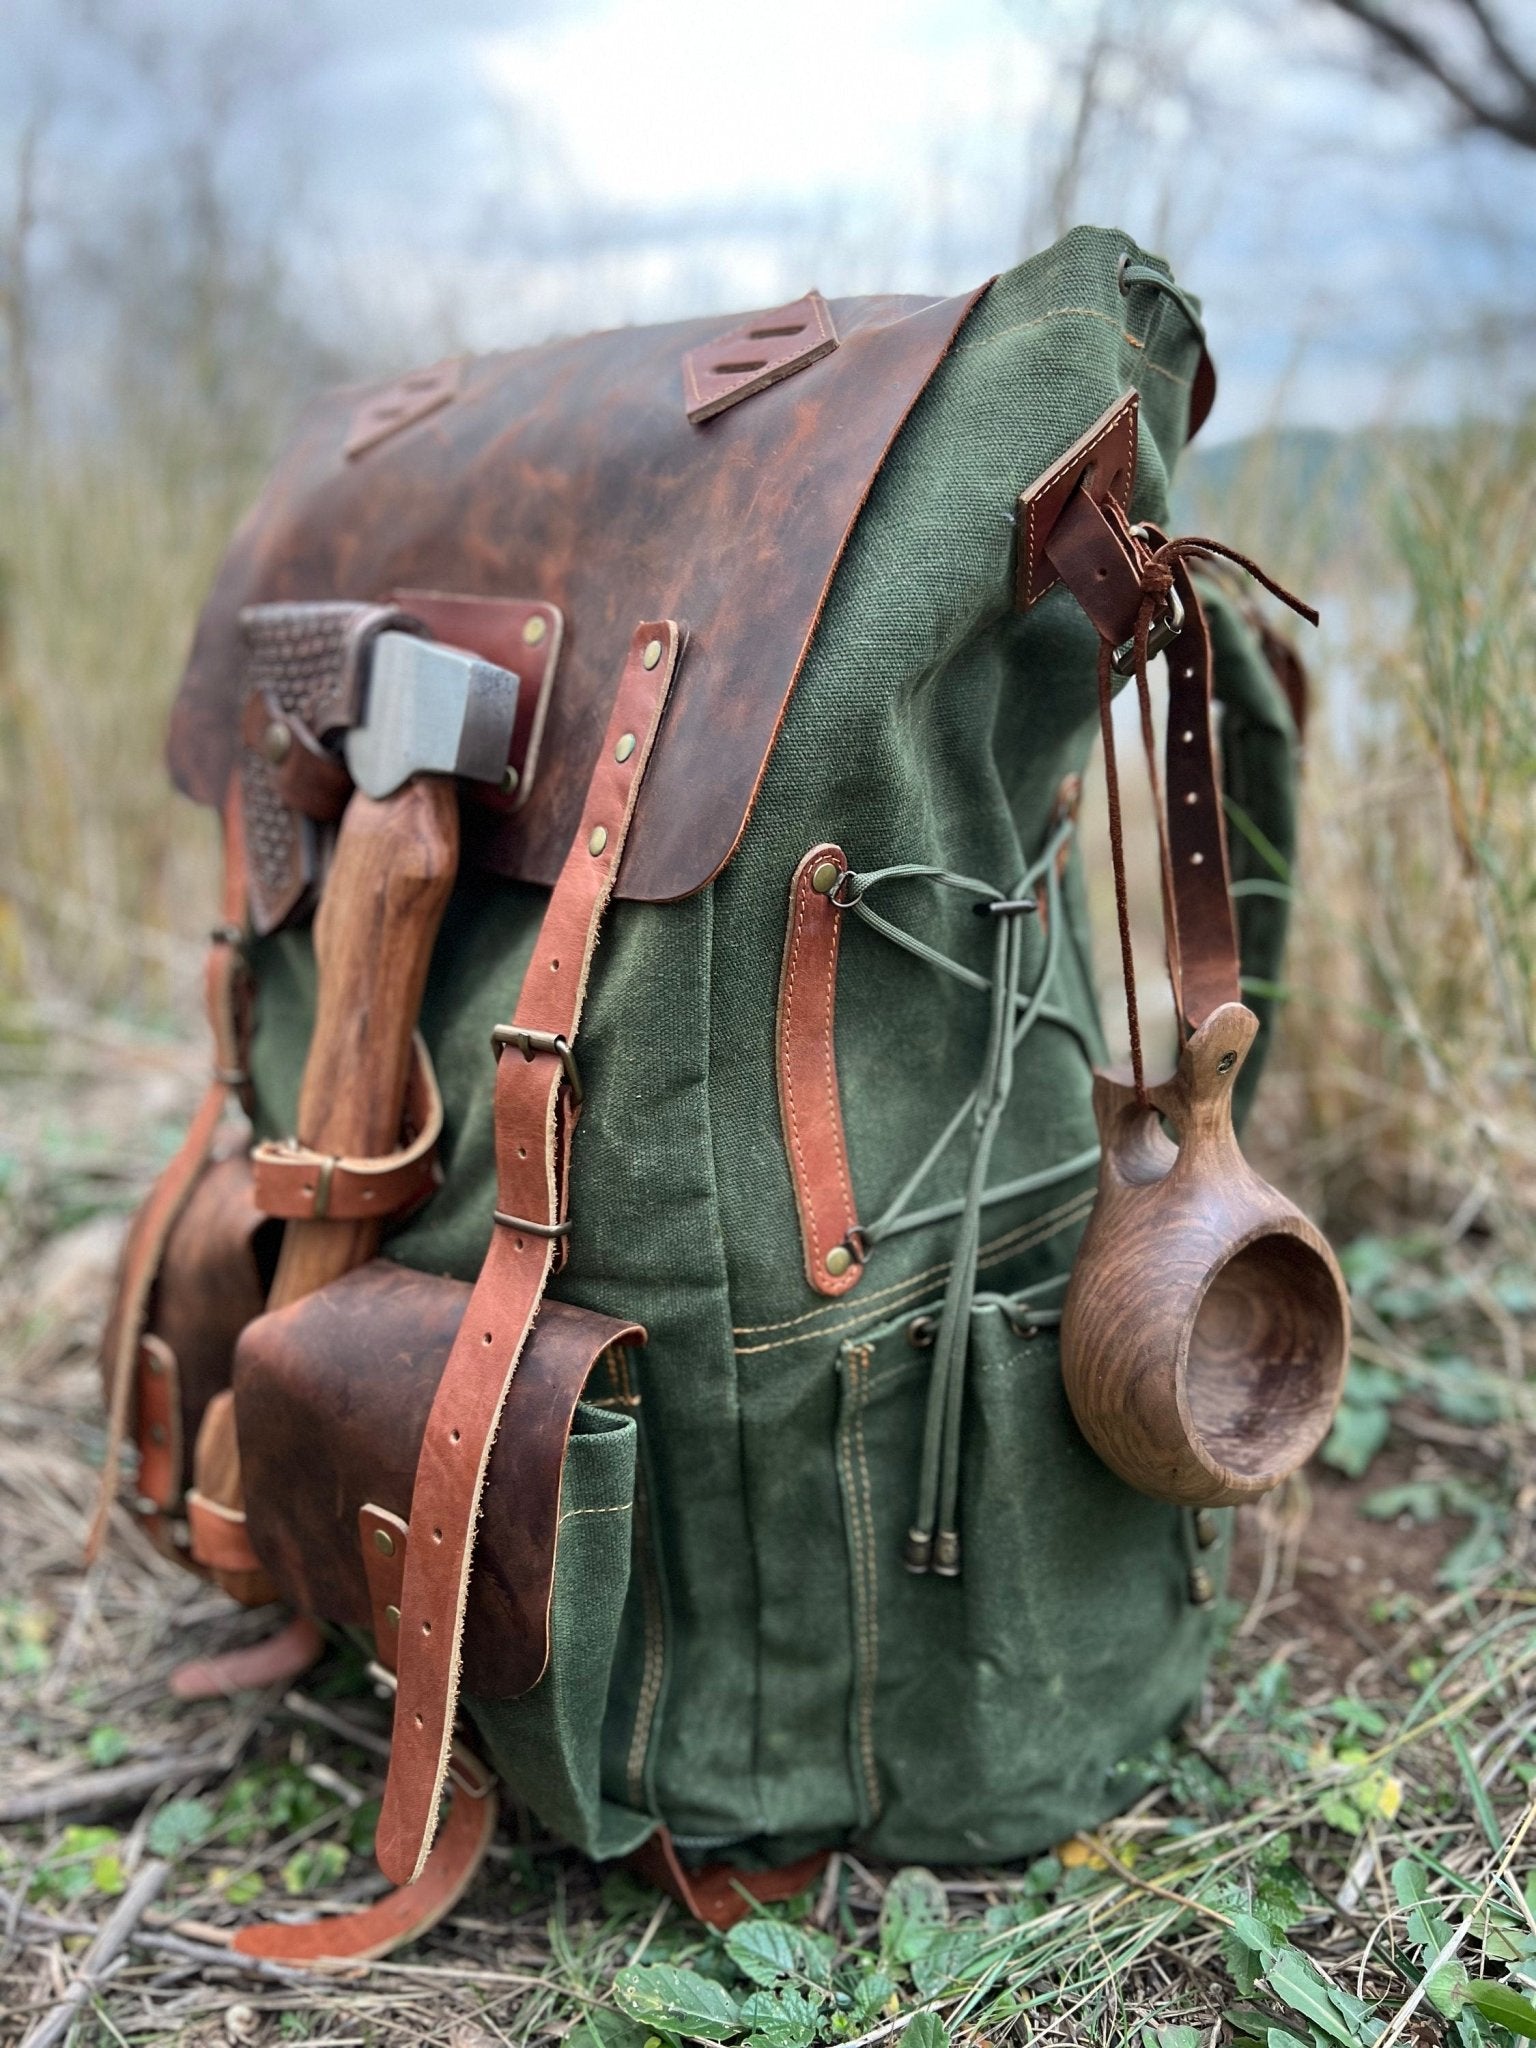 Handmade Waxed Canvas Backpack 50 L Green Brown Options Leather